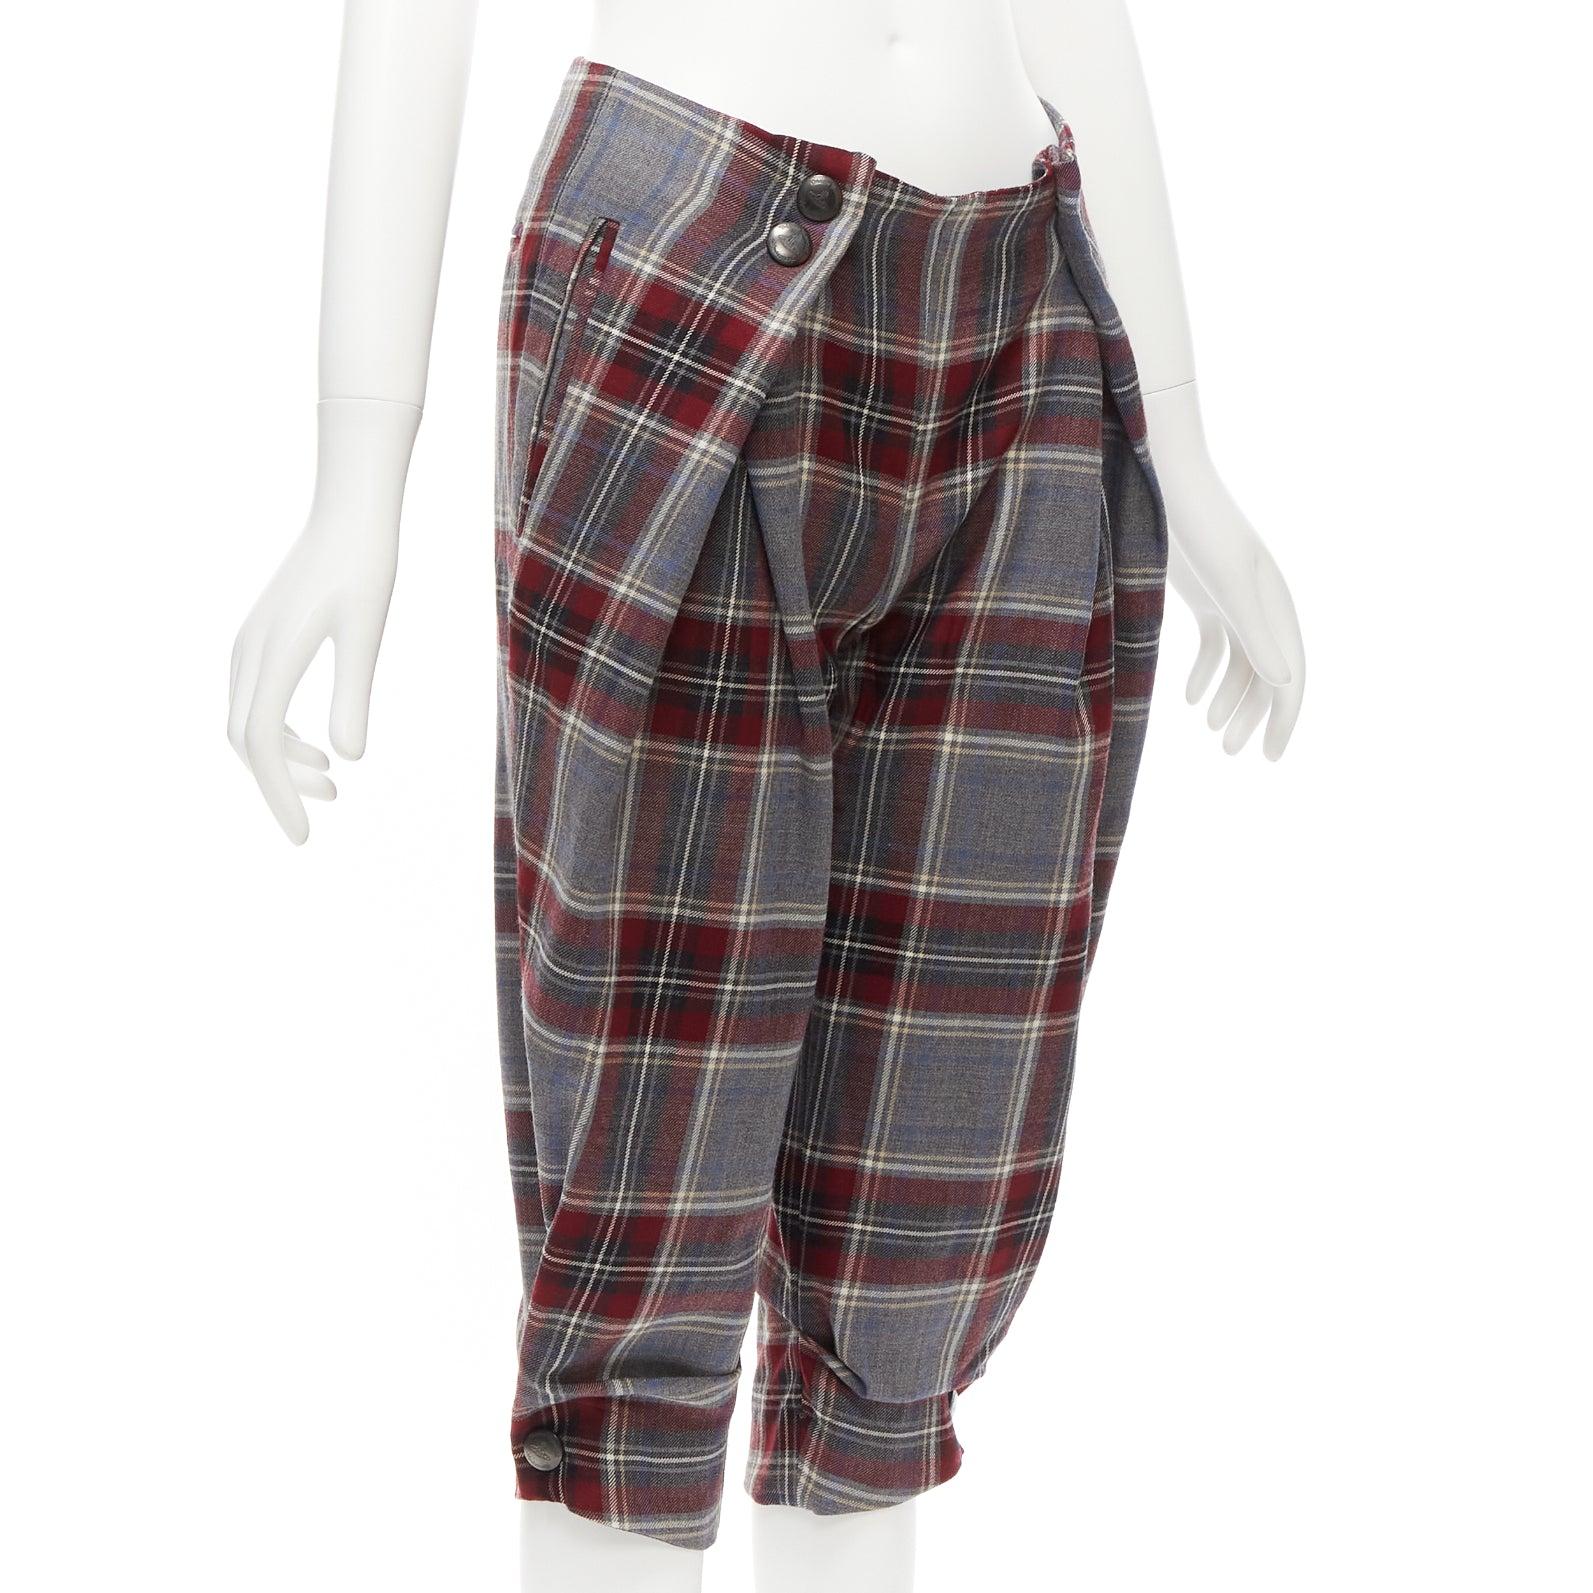 VIVIENNE WESTWOOD Anglomania burgundy grey plaid pinched waist harem pants FR38 S
Reference: JACG/A00103
Brand: Vivienne Westwood
Designer: Vivienne Westwood
Collection: Anglomania
Material: Virgin Wool, Blend
Color: Burgundy, Multicolour
Pattern: